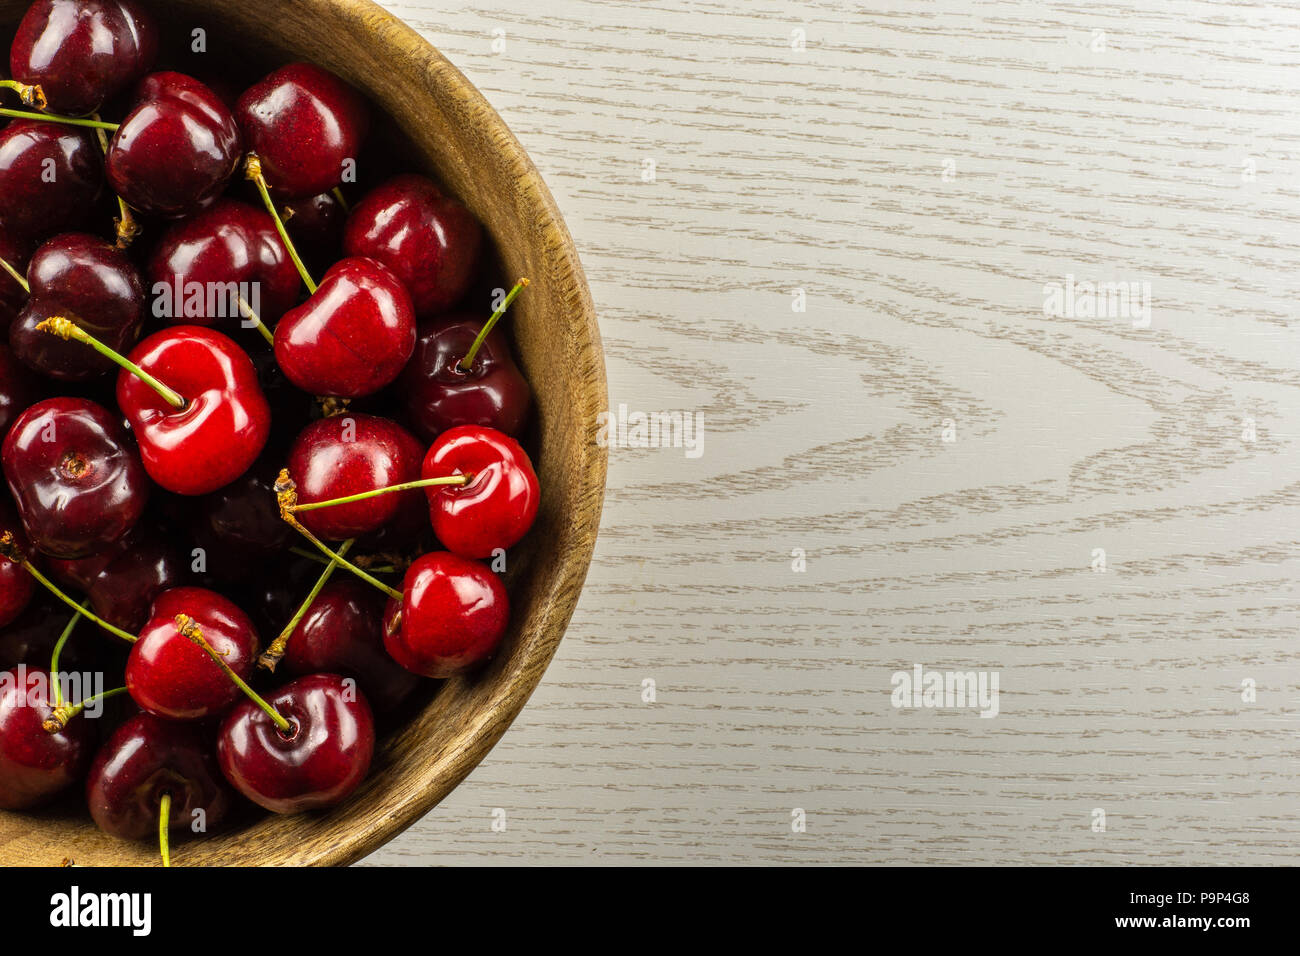 Sweet bright red cherry in a wooden bowl flatlay on grey wood Stock Photo